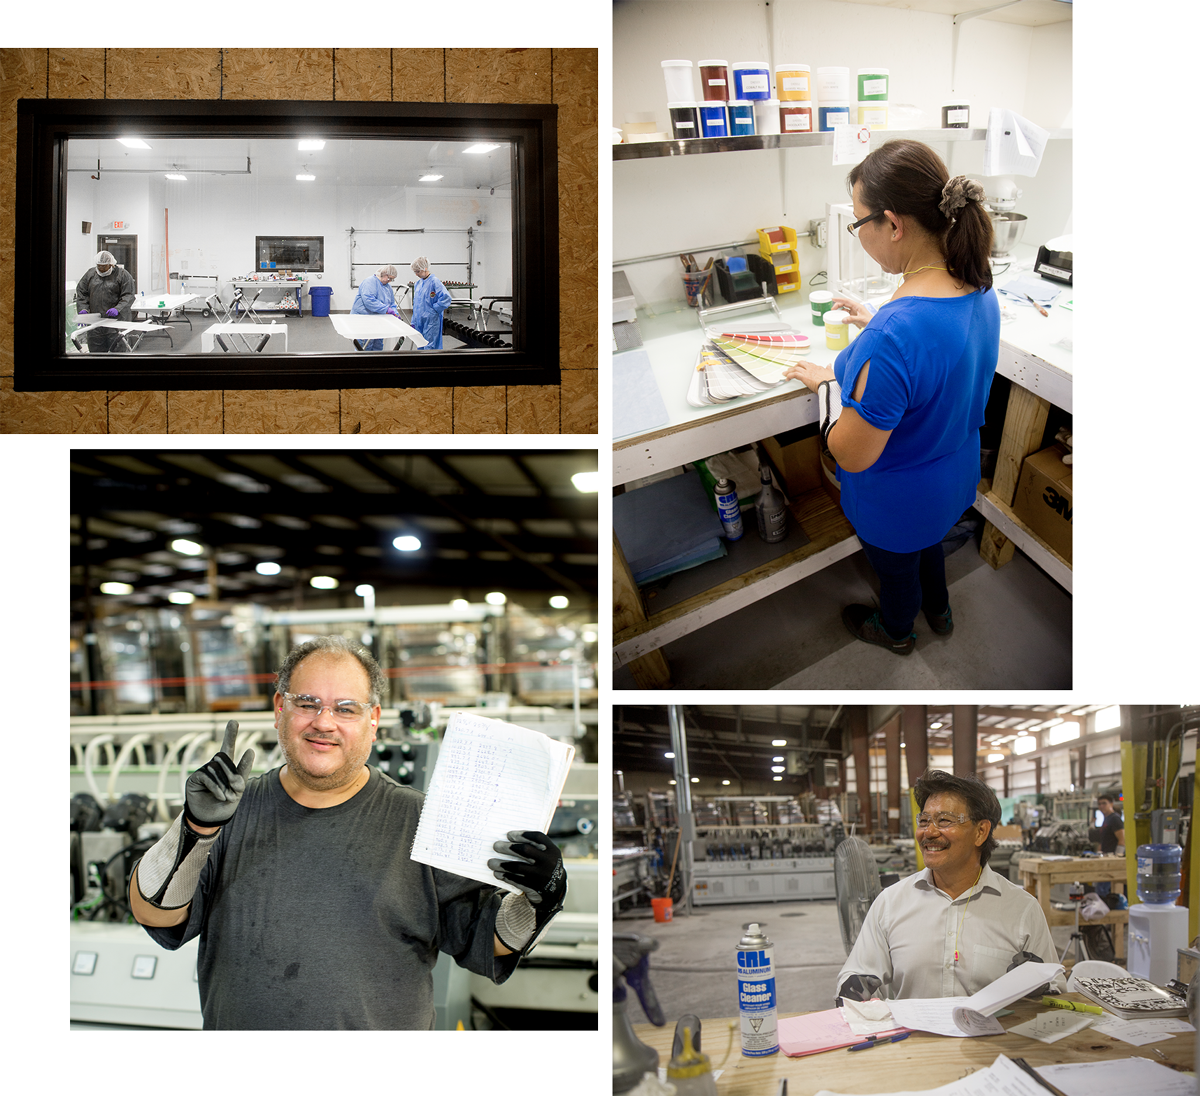 Collage of Dillmeier Employees working in the factory and offices